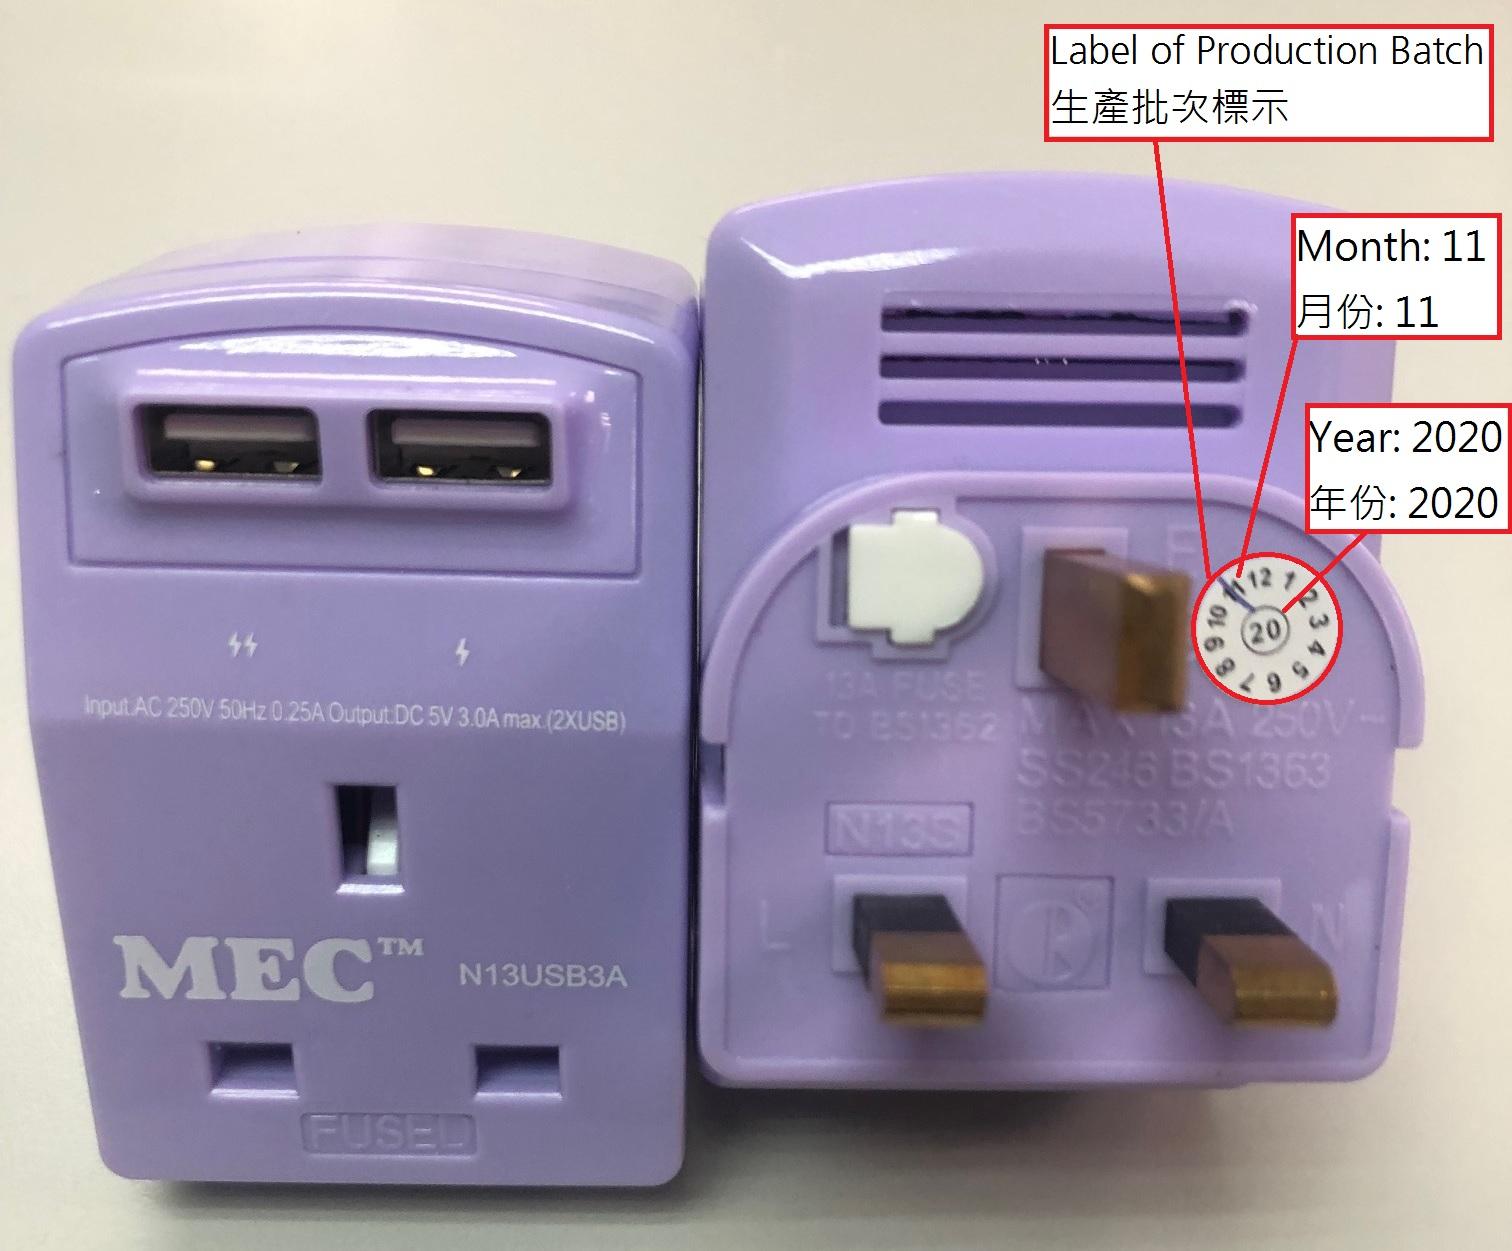 The Electrical and Mechanical Services Department today (May 13) urged the public to stop using a model of MEC adaptor with the model number N13USB3A. Photo shows the adaptor in purple and its product markings.